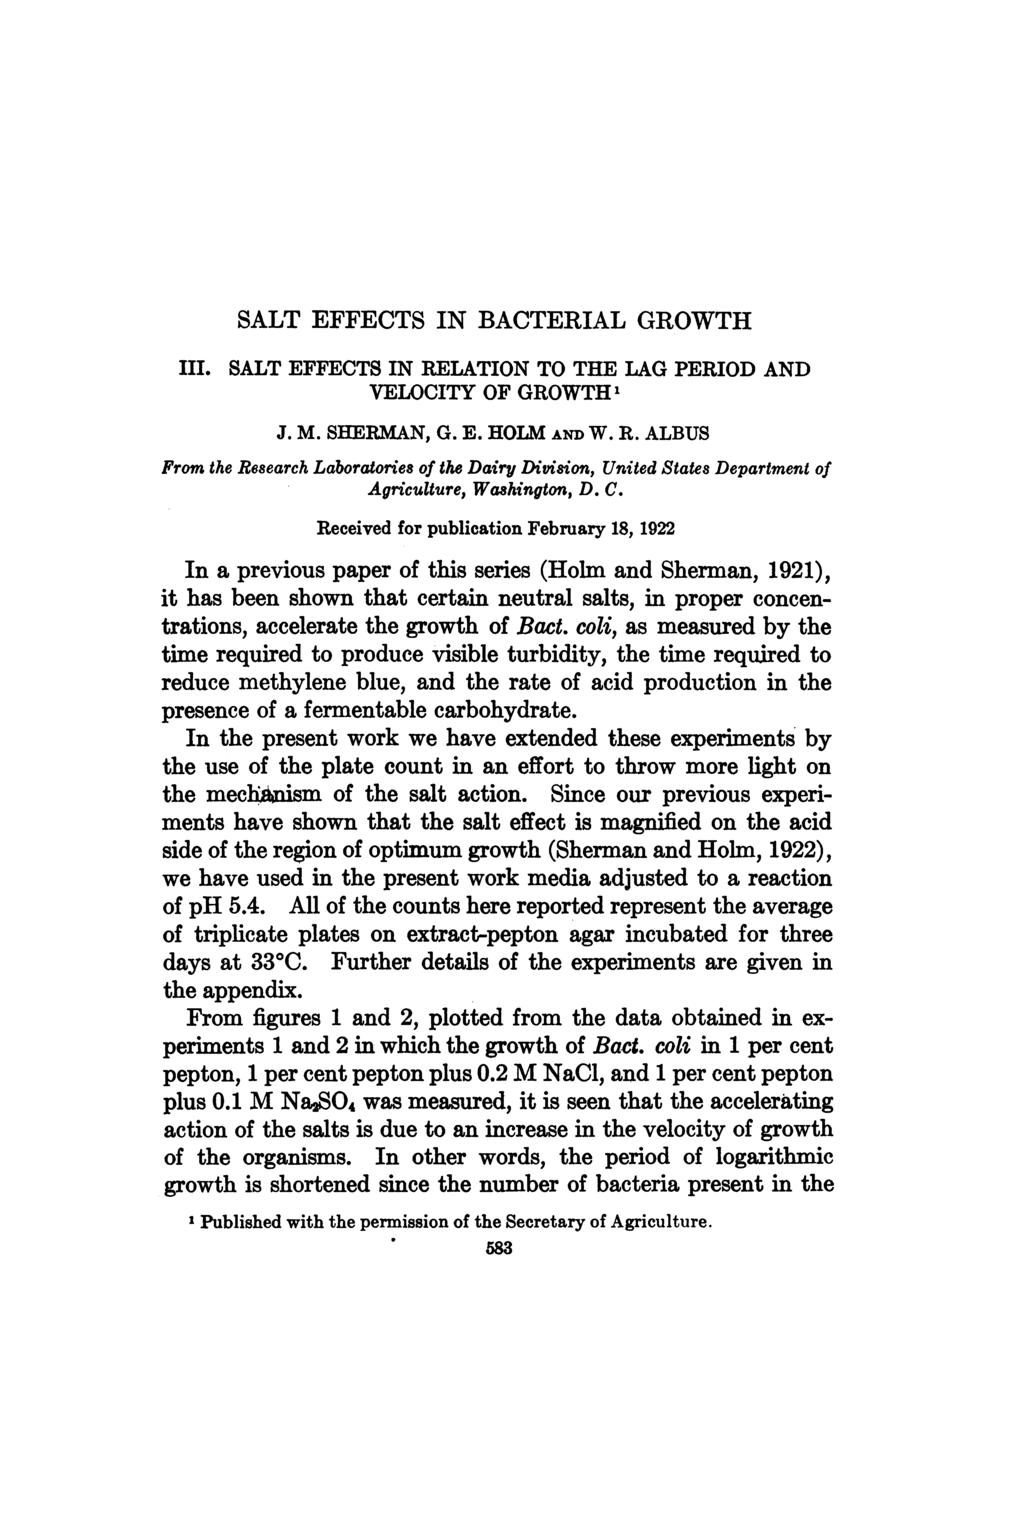 III. SALT EFFECTS IN BACTERIAL GROWTH SALT EFFECTS IN RELATION TO THE LAG PERIOD AND VELOCITY OF GROWTH 1 J. M. SHERMAN, G. E. HOLM AN) W. R. ALBUS From the Research Laboratories of the Dairy Division, United States Department of D.